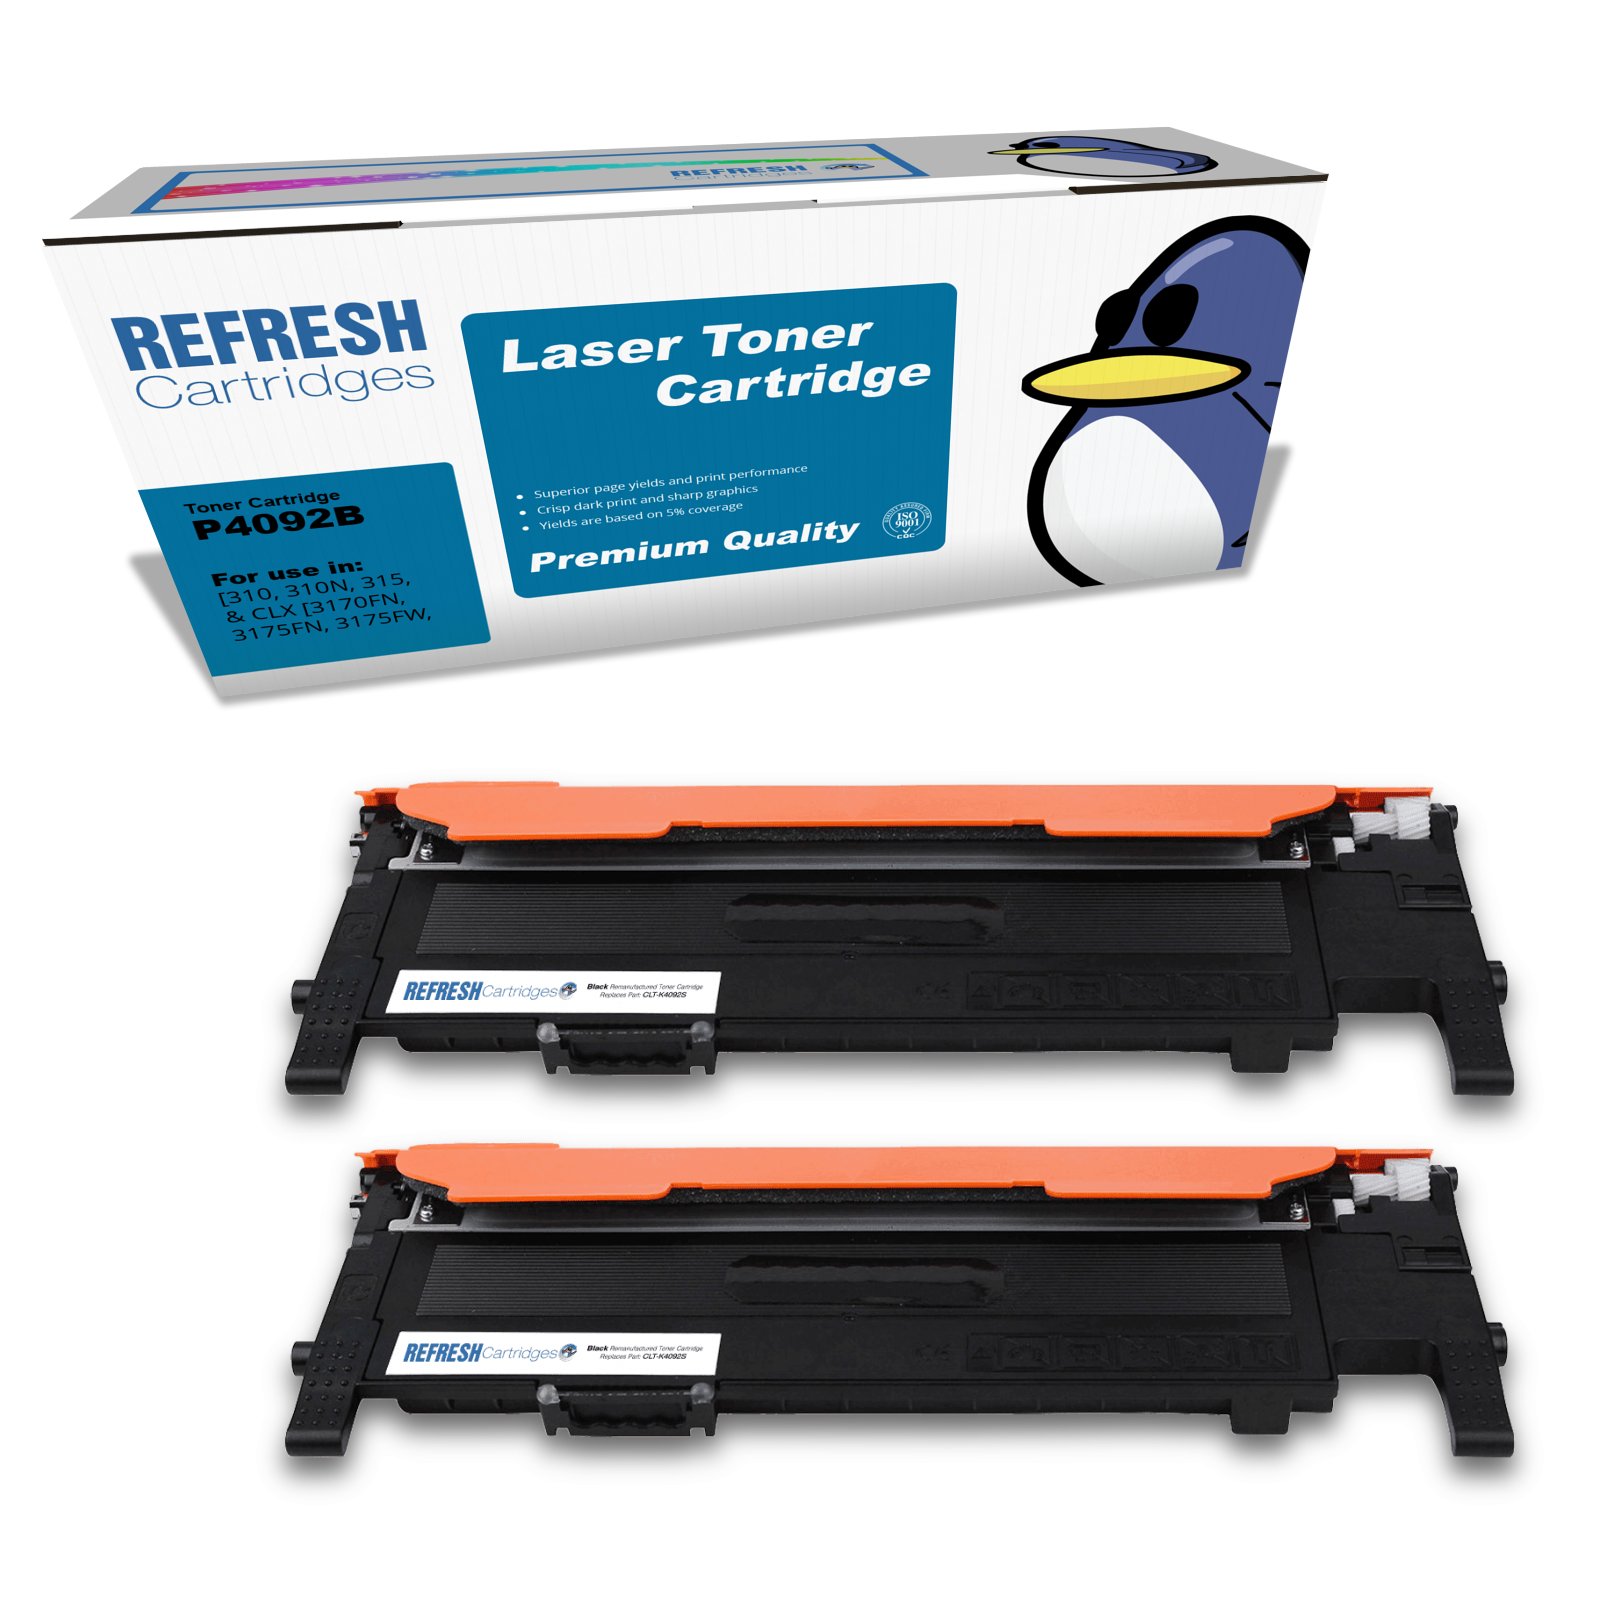 Remanufactured K4092S (CLT-P4092B/ELS) Black Replacement Toner Cartridges Twin Pack for Samsung Printers